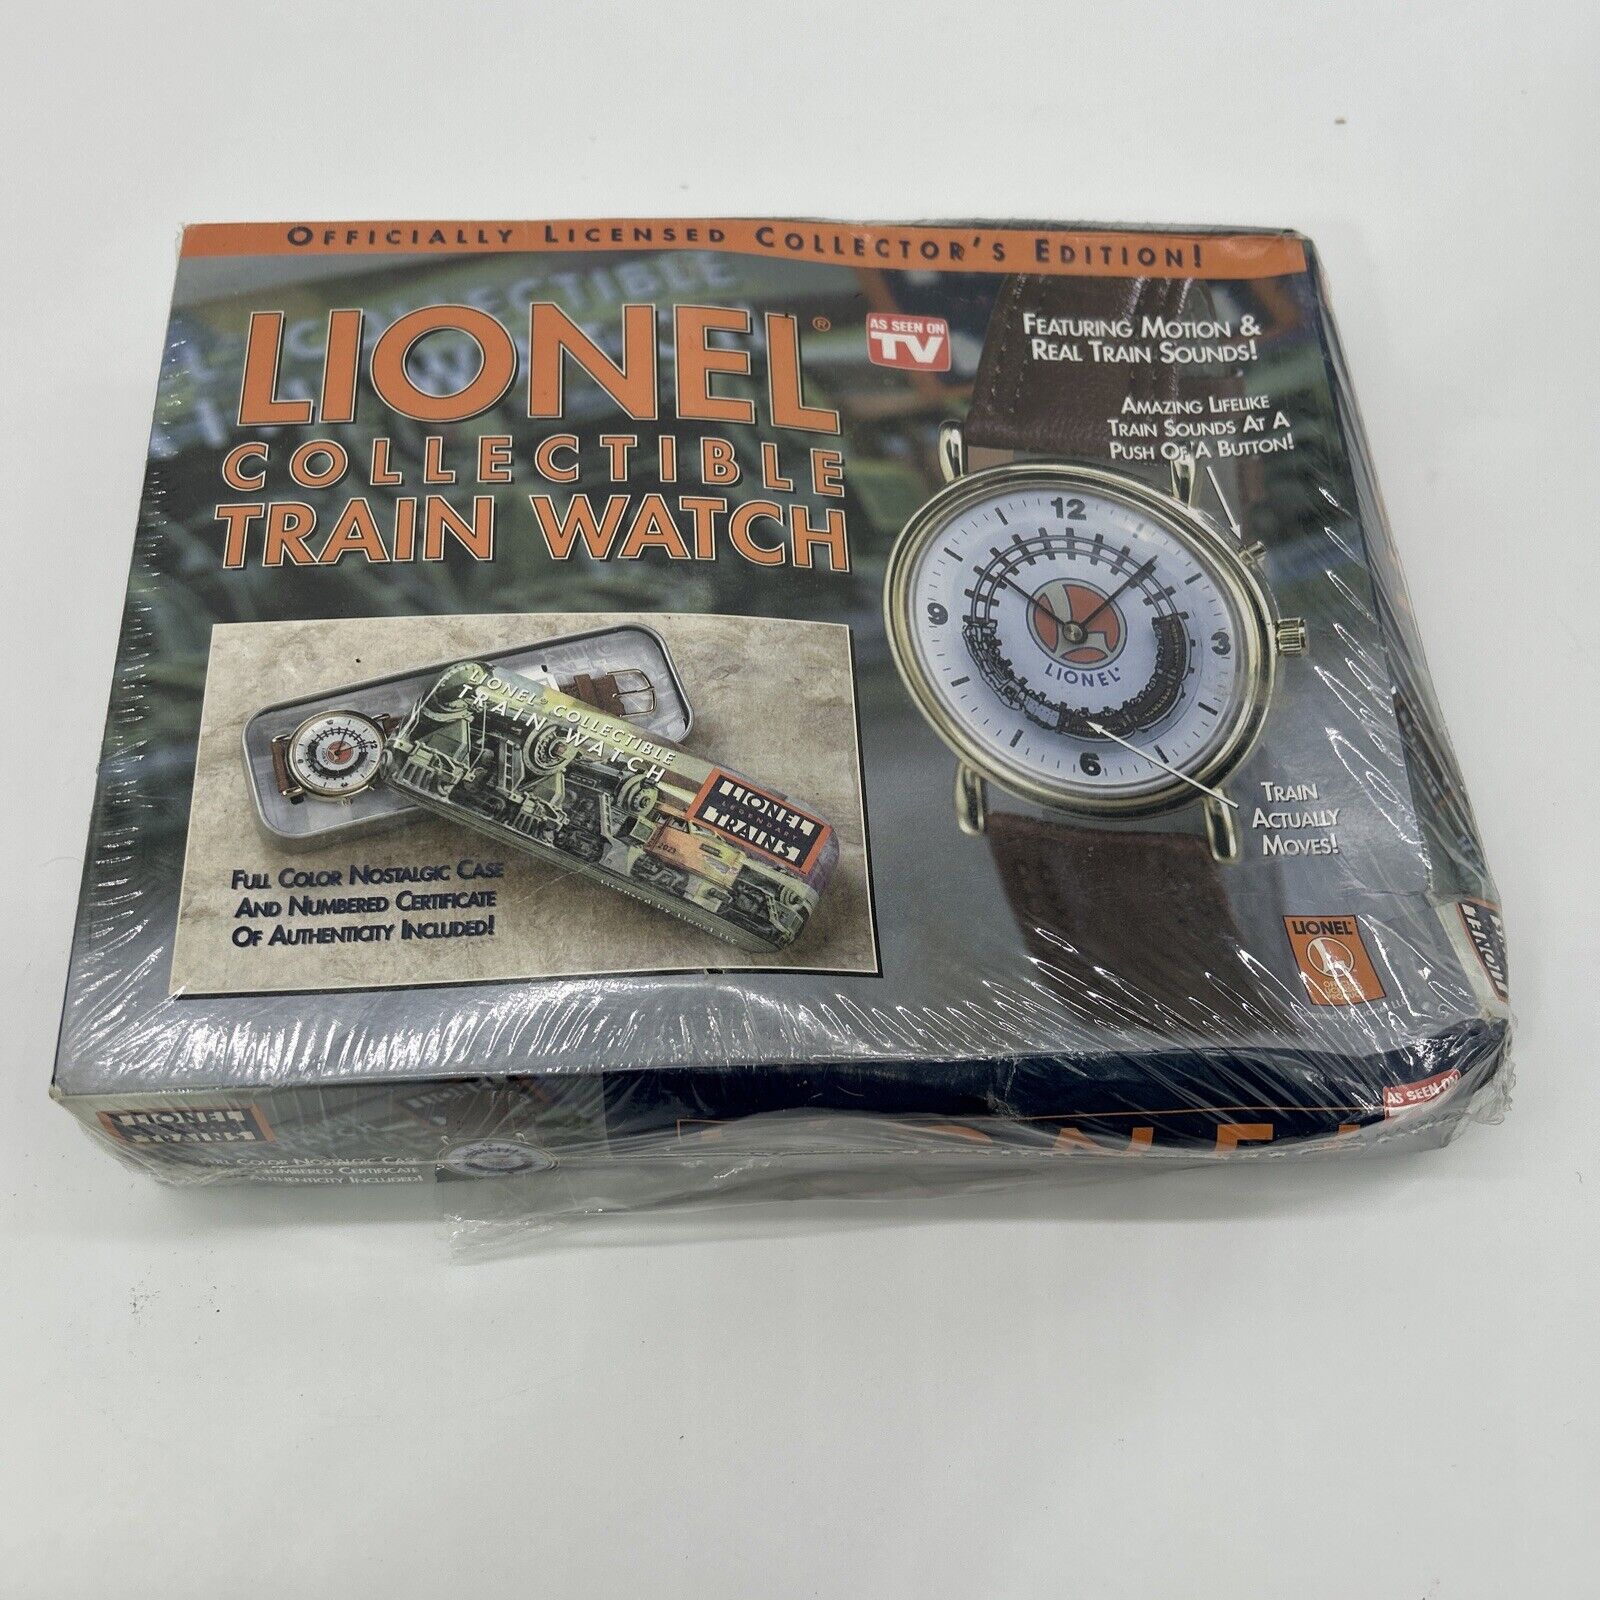 LIONEL TRAIN WATCH WITH MOVING TRAIN, REAL TRAIN SOUNDS, CERIFICATE, CASE SEALED